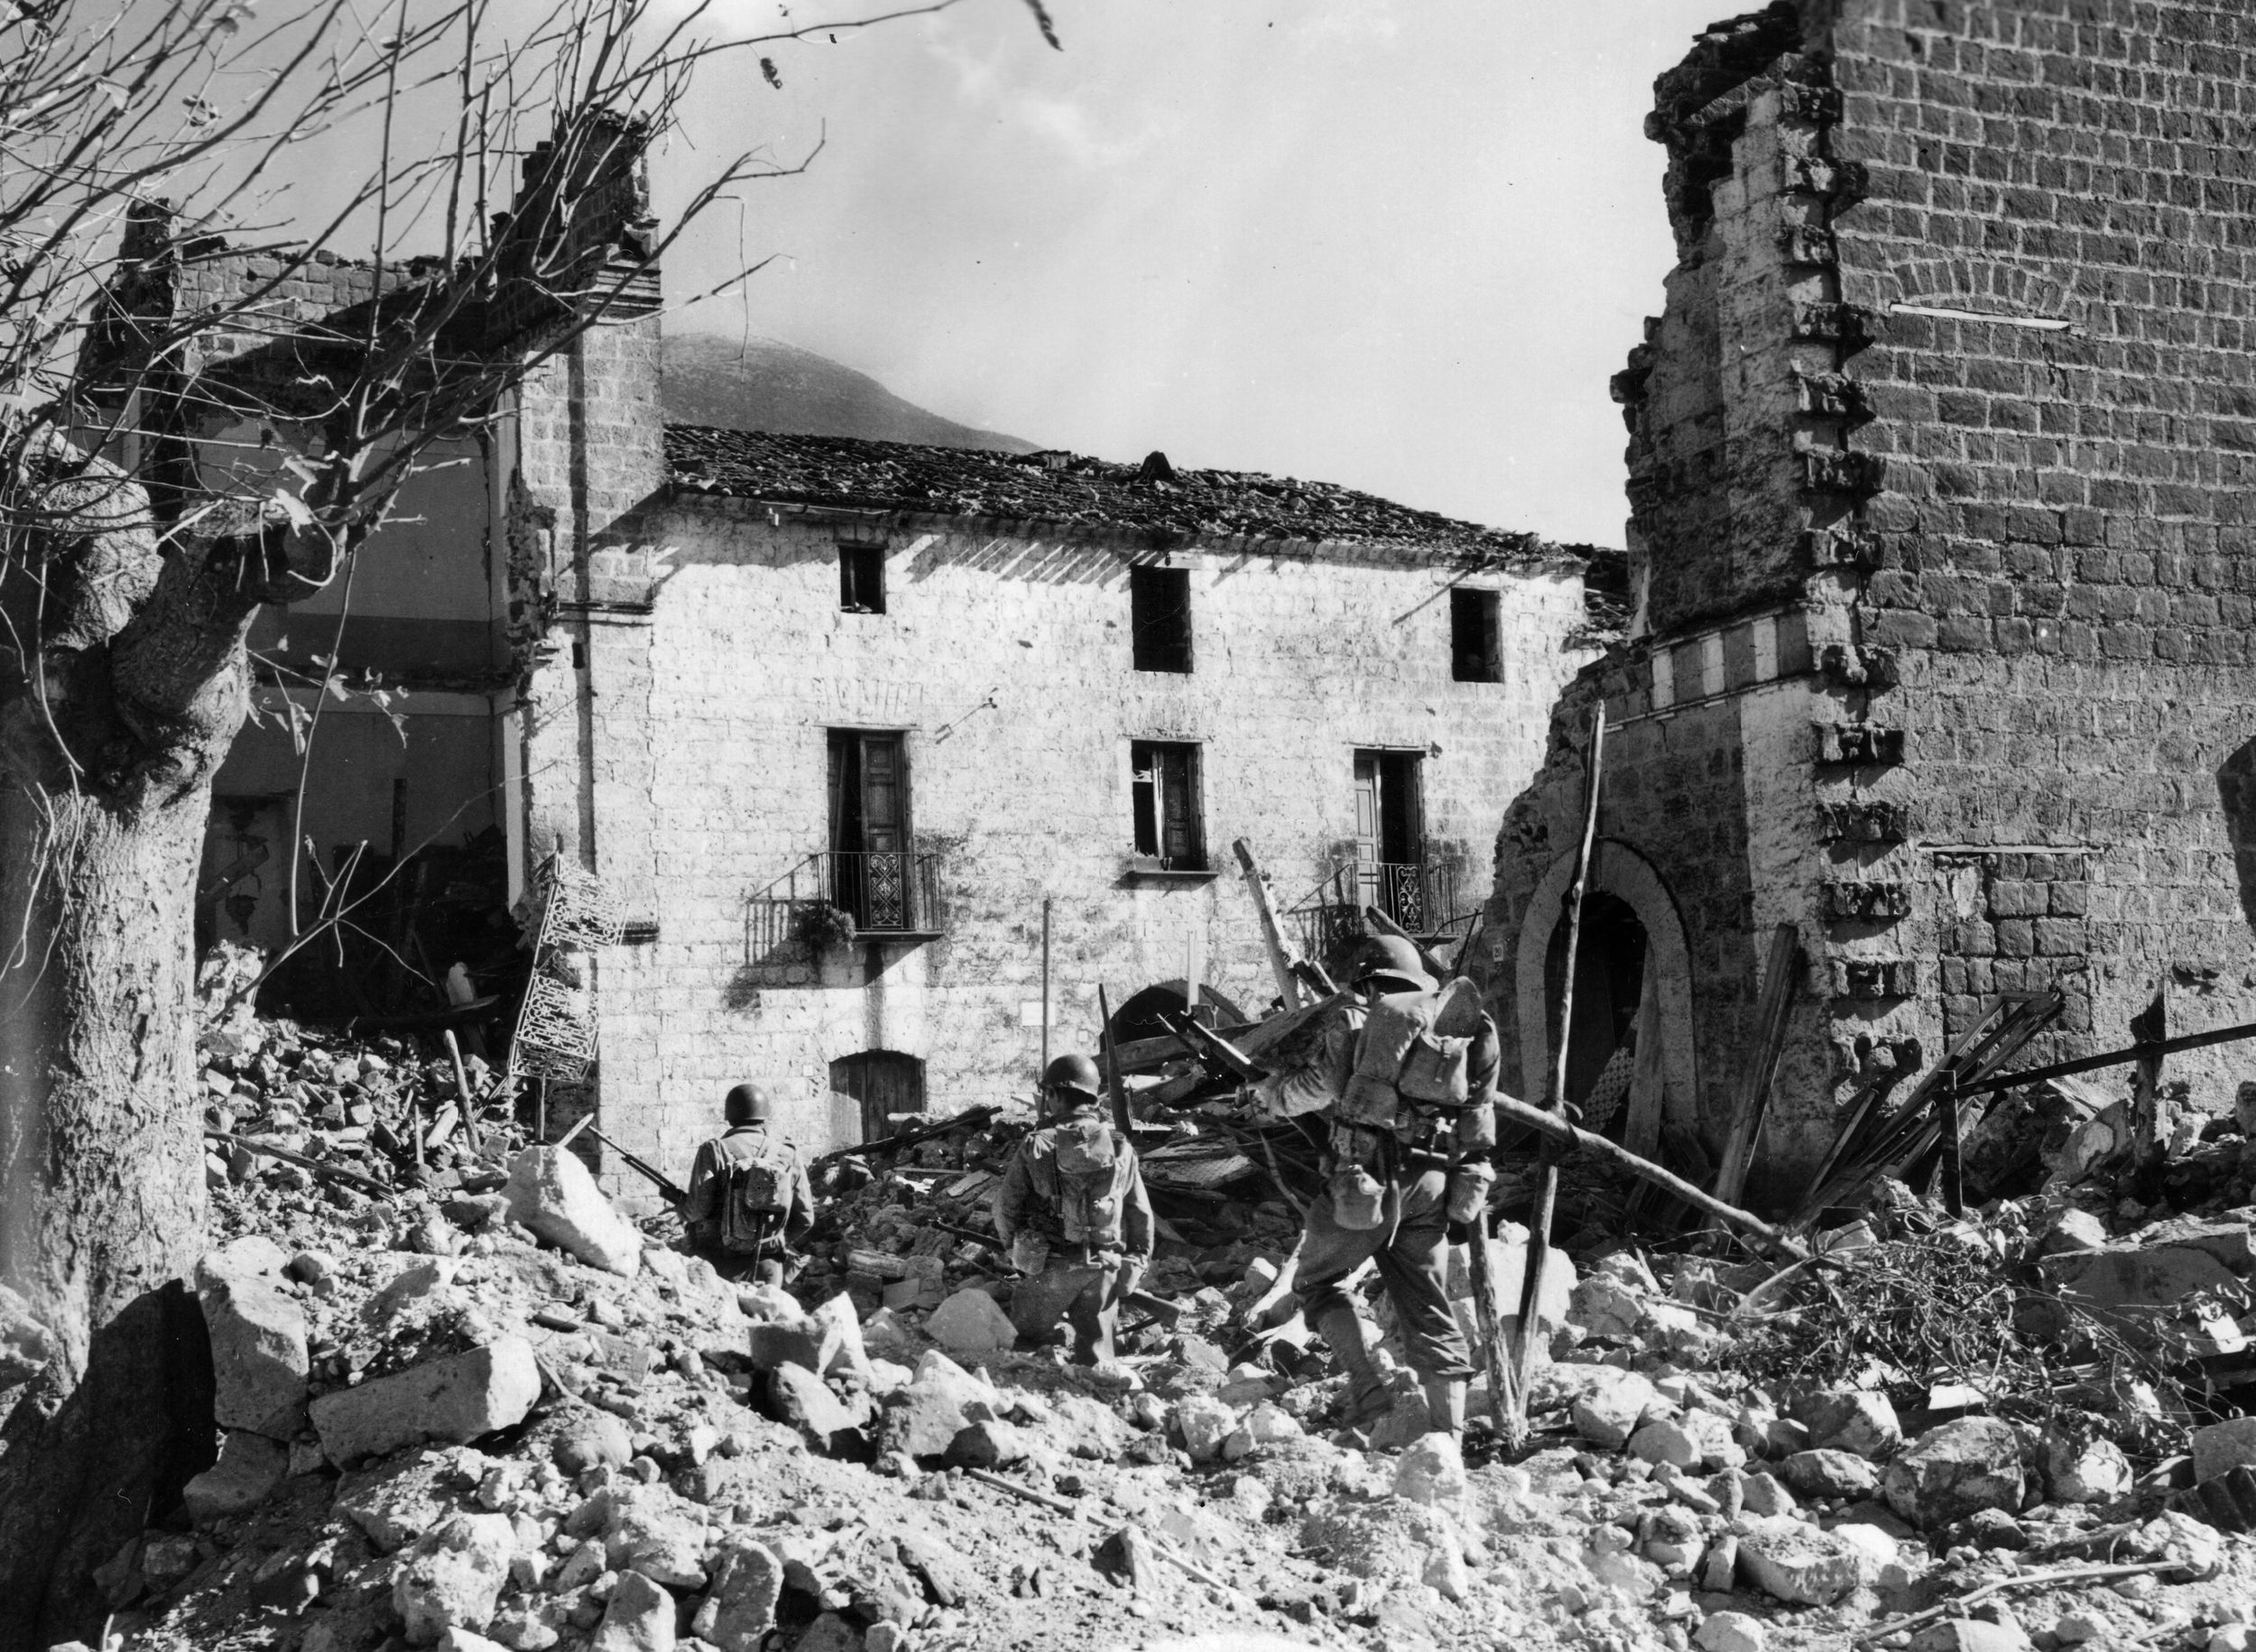 A three-man patrol from Company I, 15th Infantry, picks its way through the rubble of Mignano, south of Cassino, November 1943. Before Cassino and the Gustav Line fell, the 3rd spearheaded the Anzio invasion.